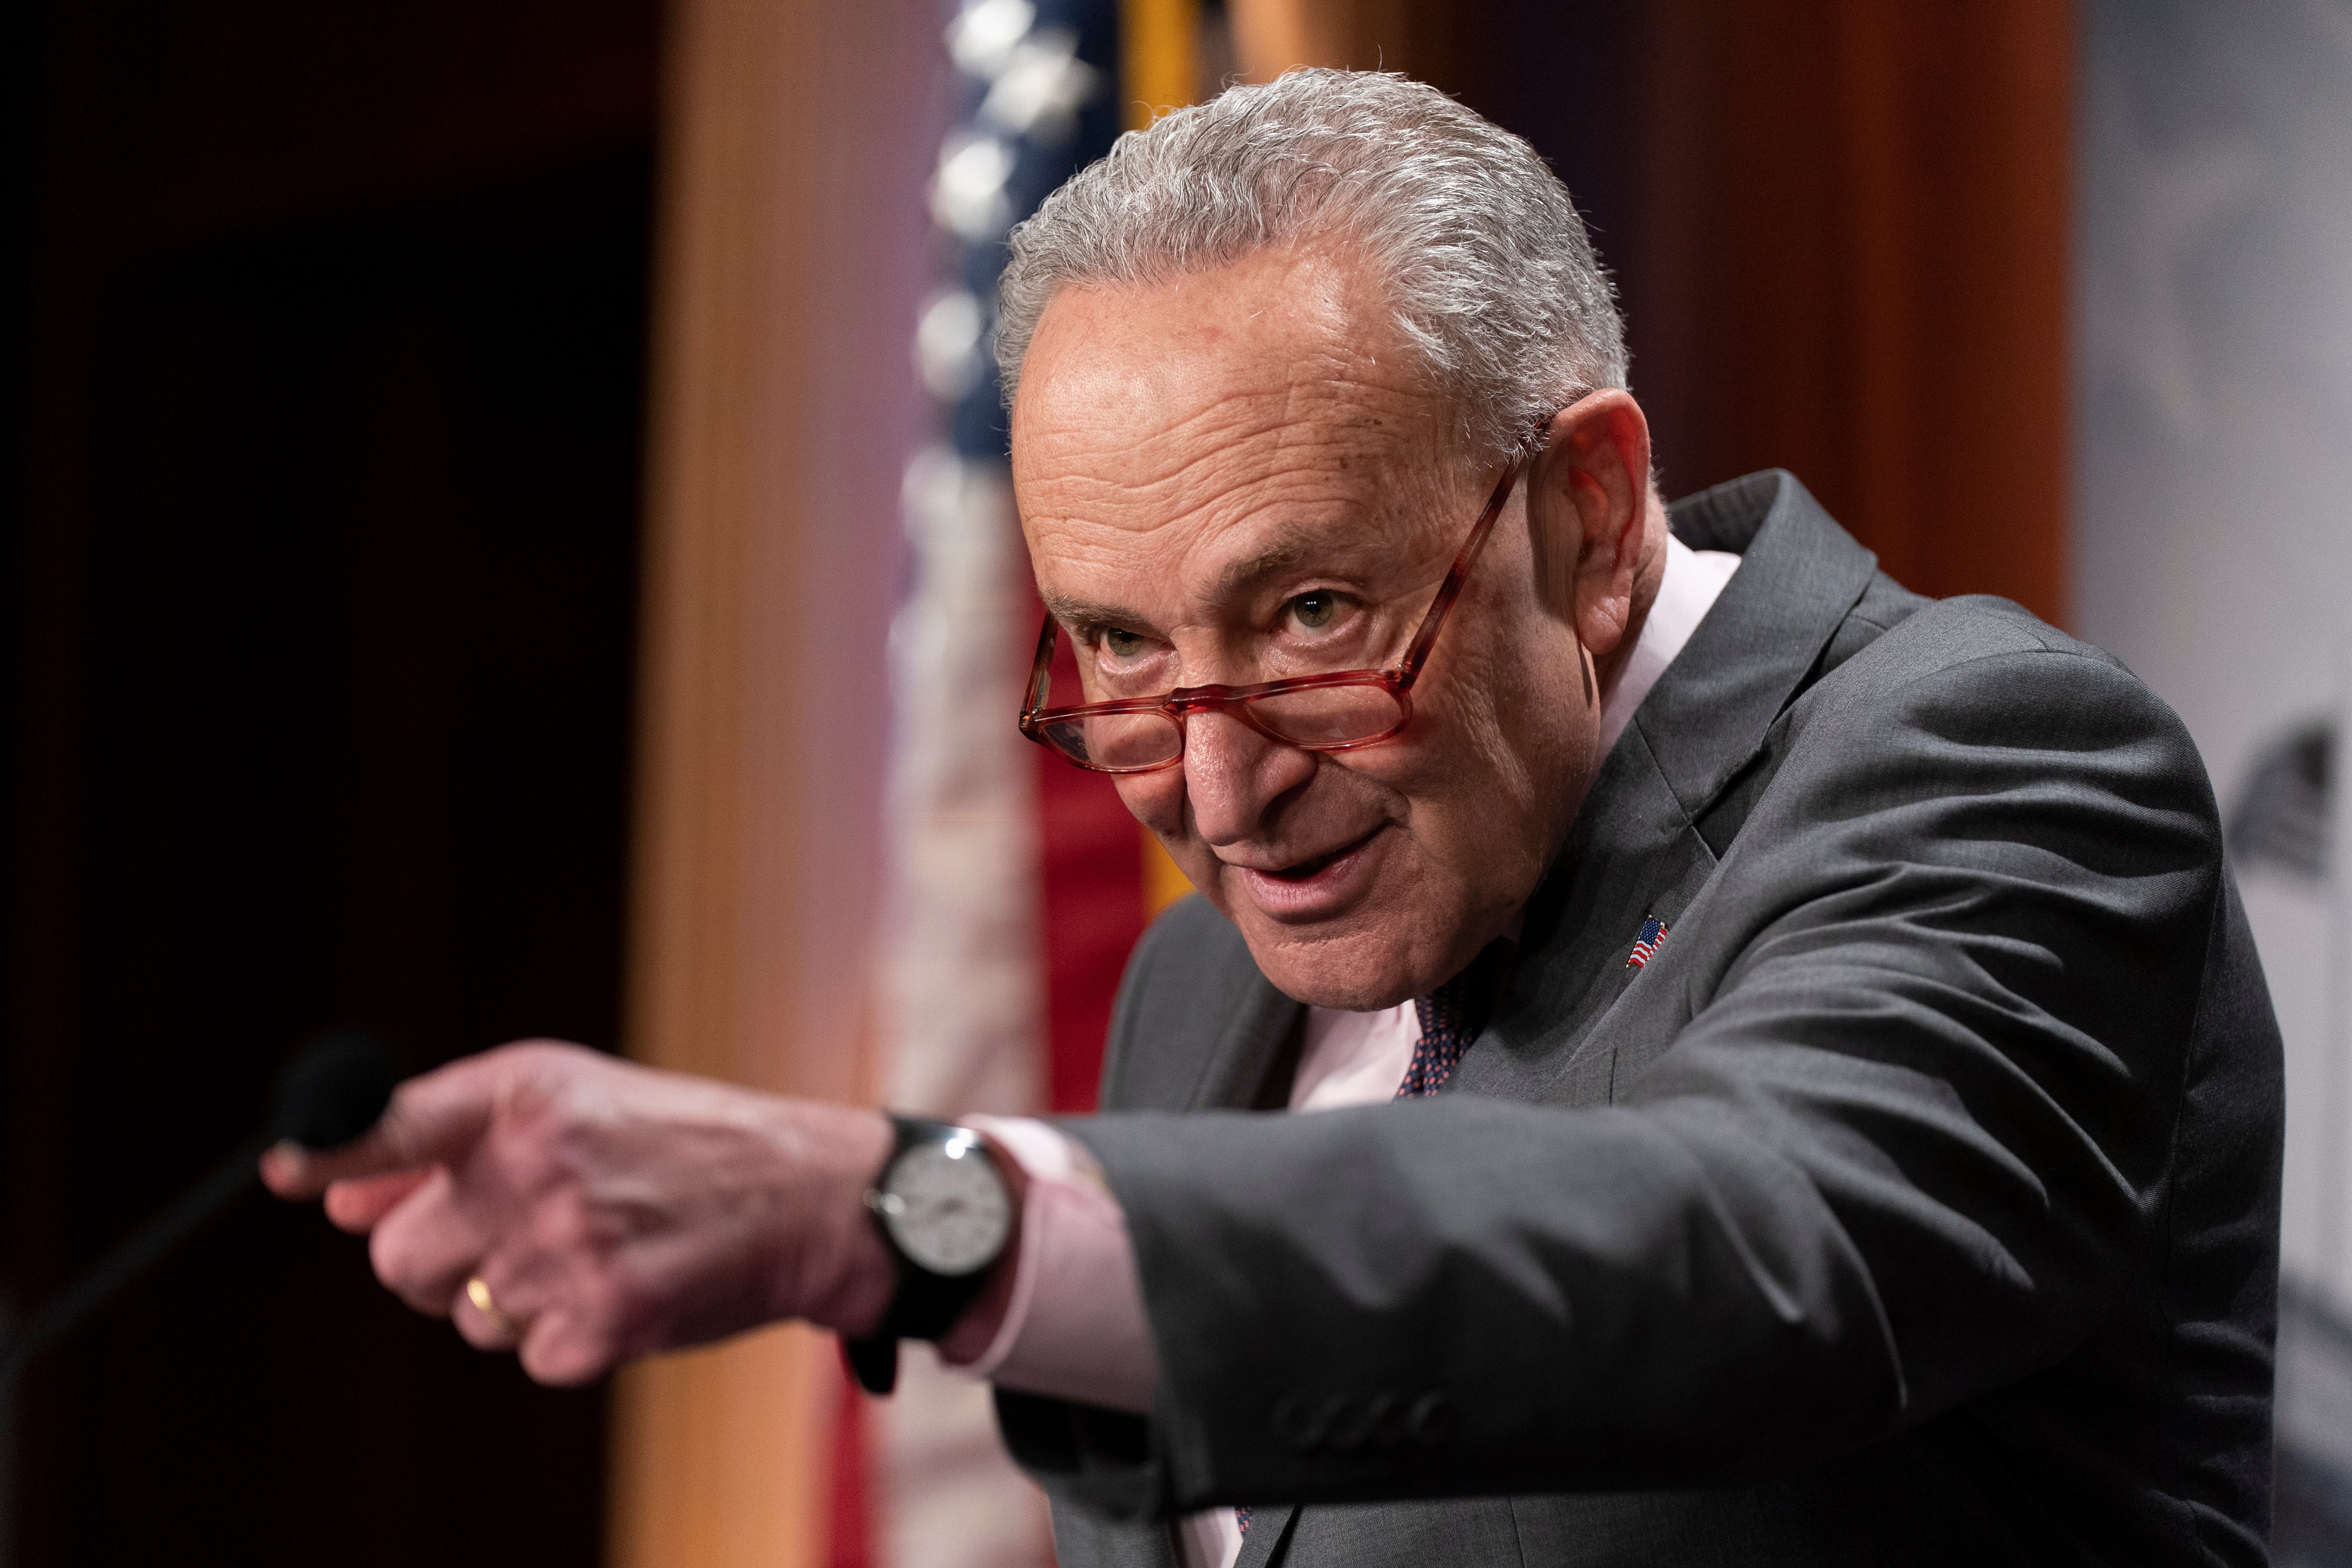 Schumer says defunding law enforcement is 'dangerous,' despite refusing to reject calls for defunding police